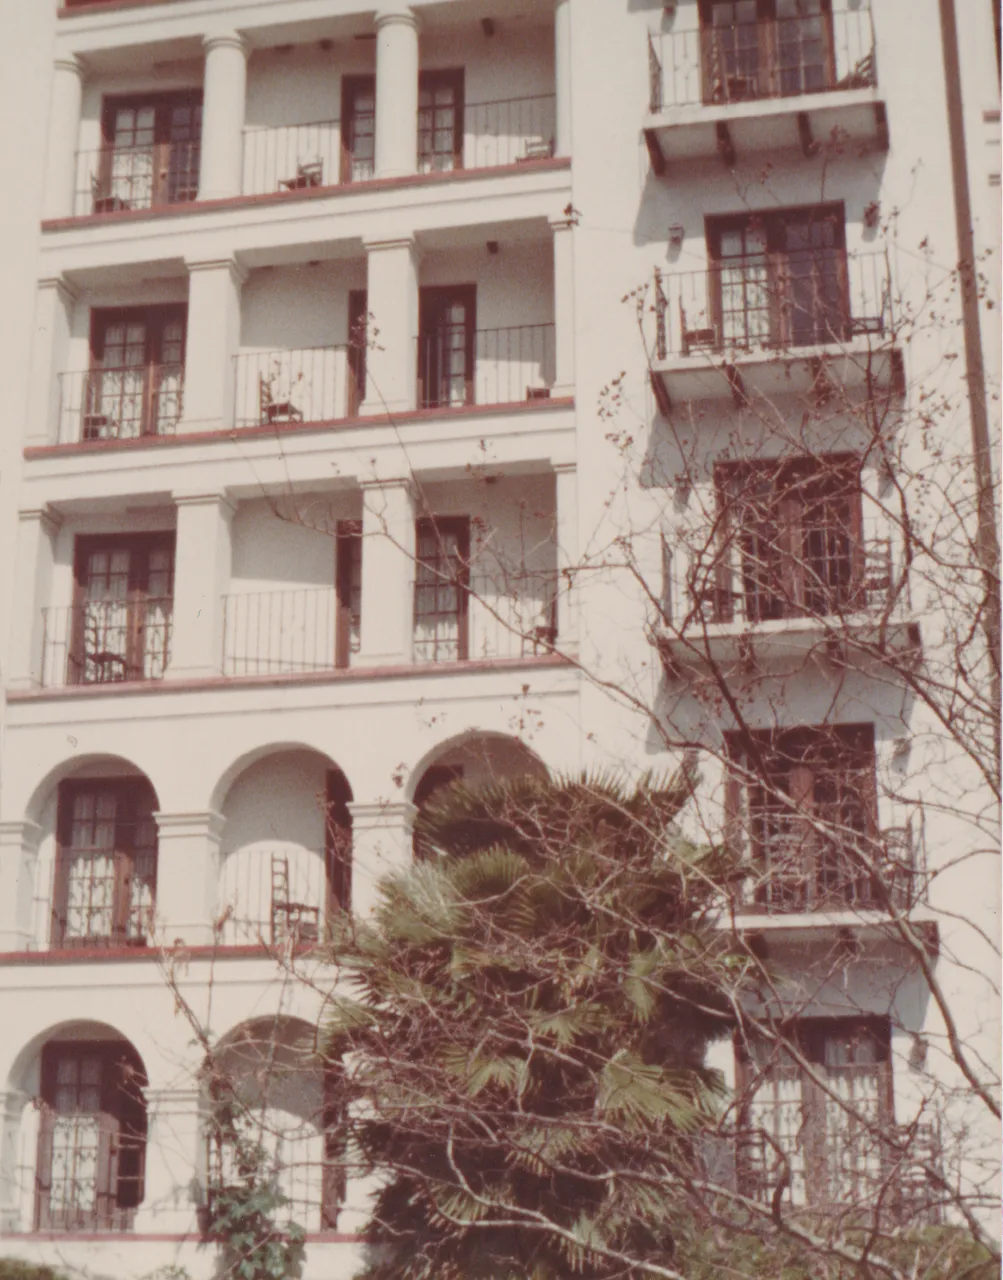 1975-03-26 - Wednesday - San Antonio, no dates on these pic-06 - Apartment building, windows, evergreen, 11pics ok.png